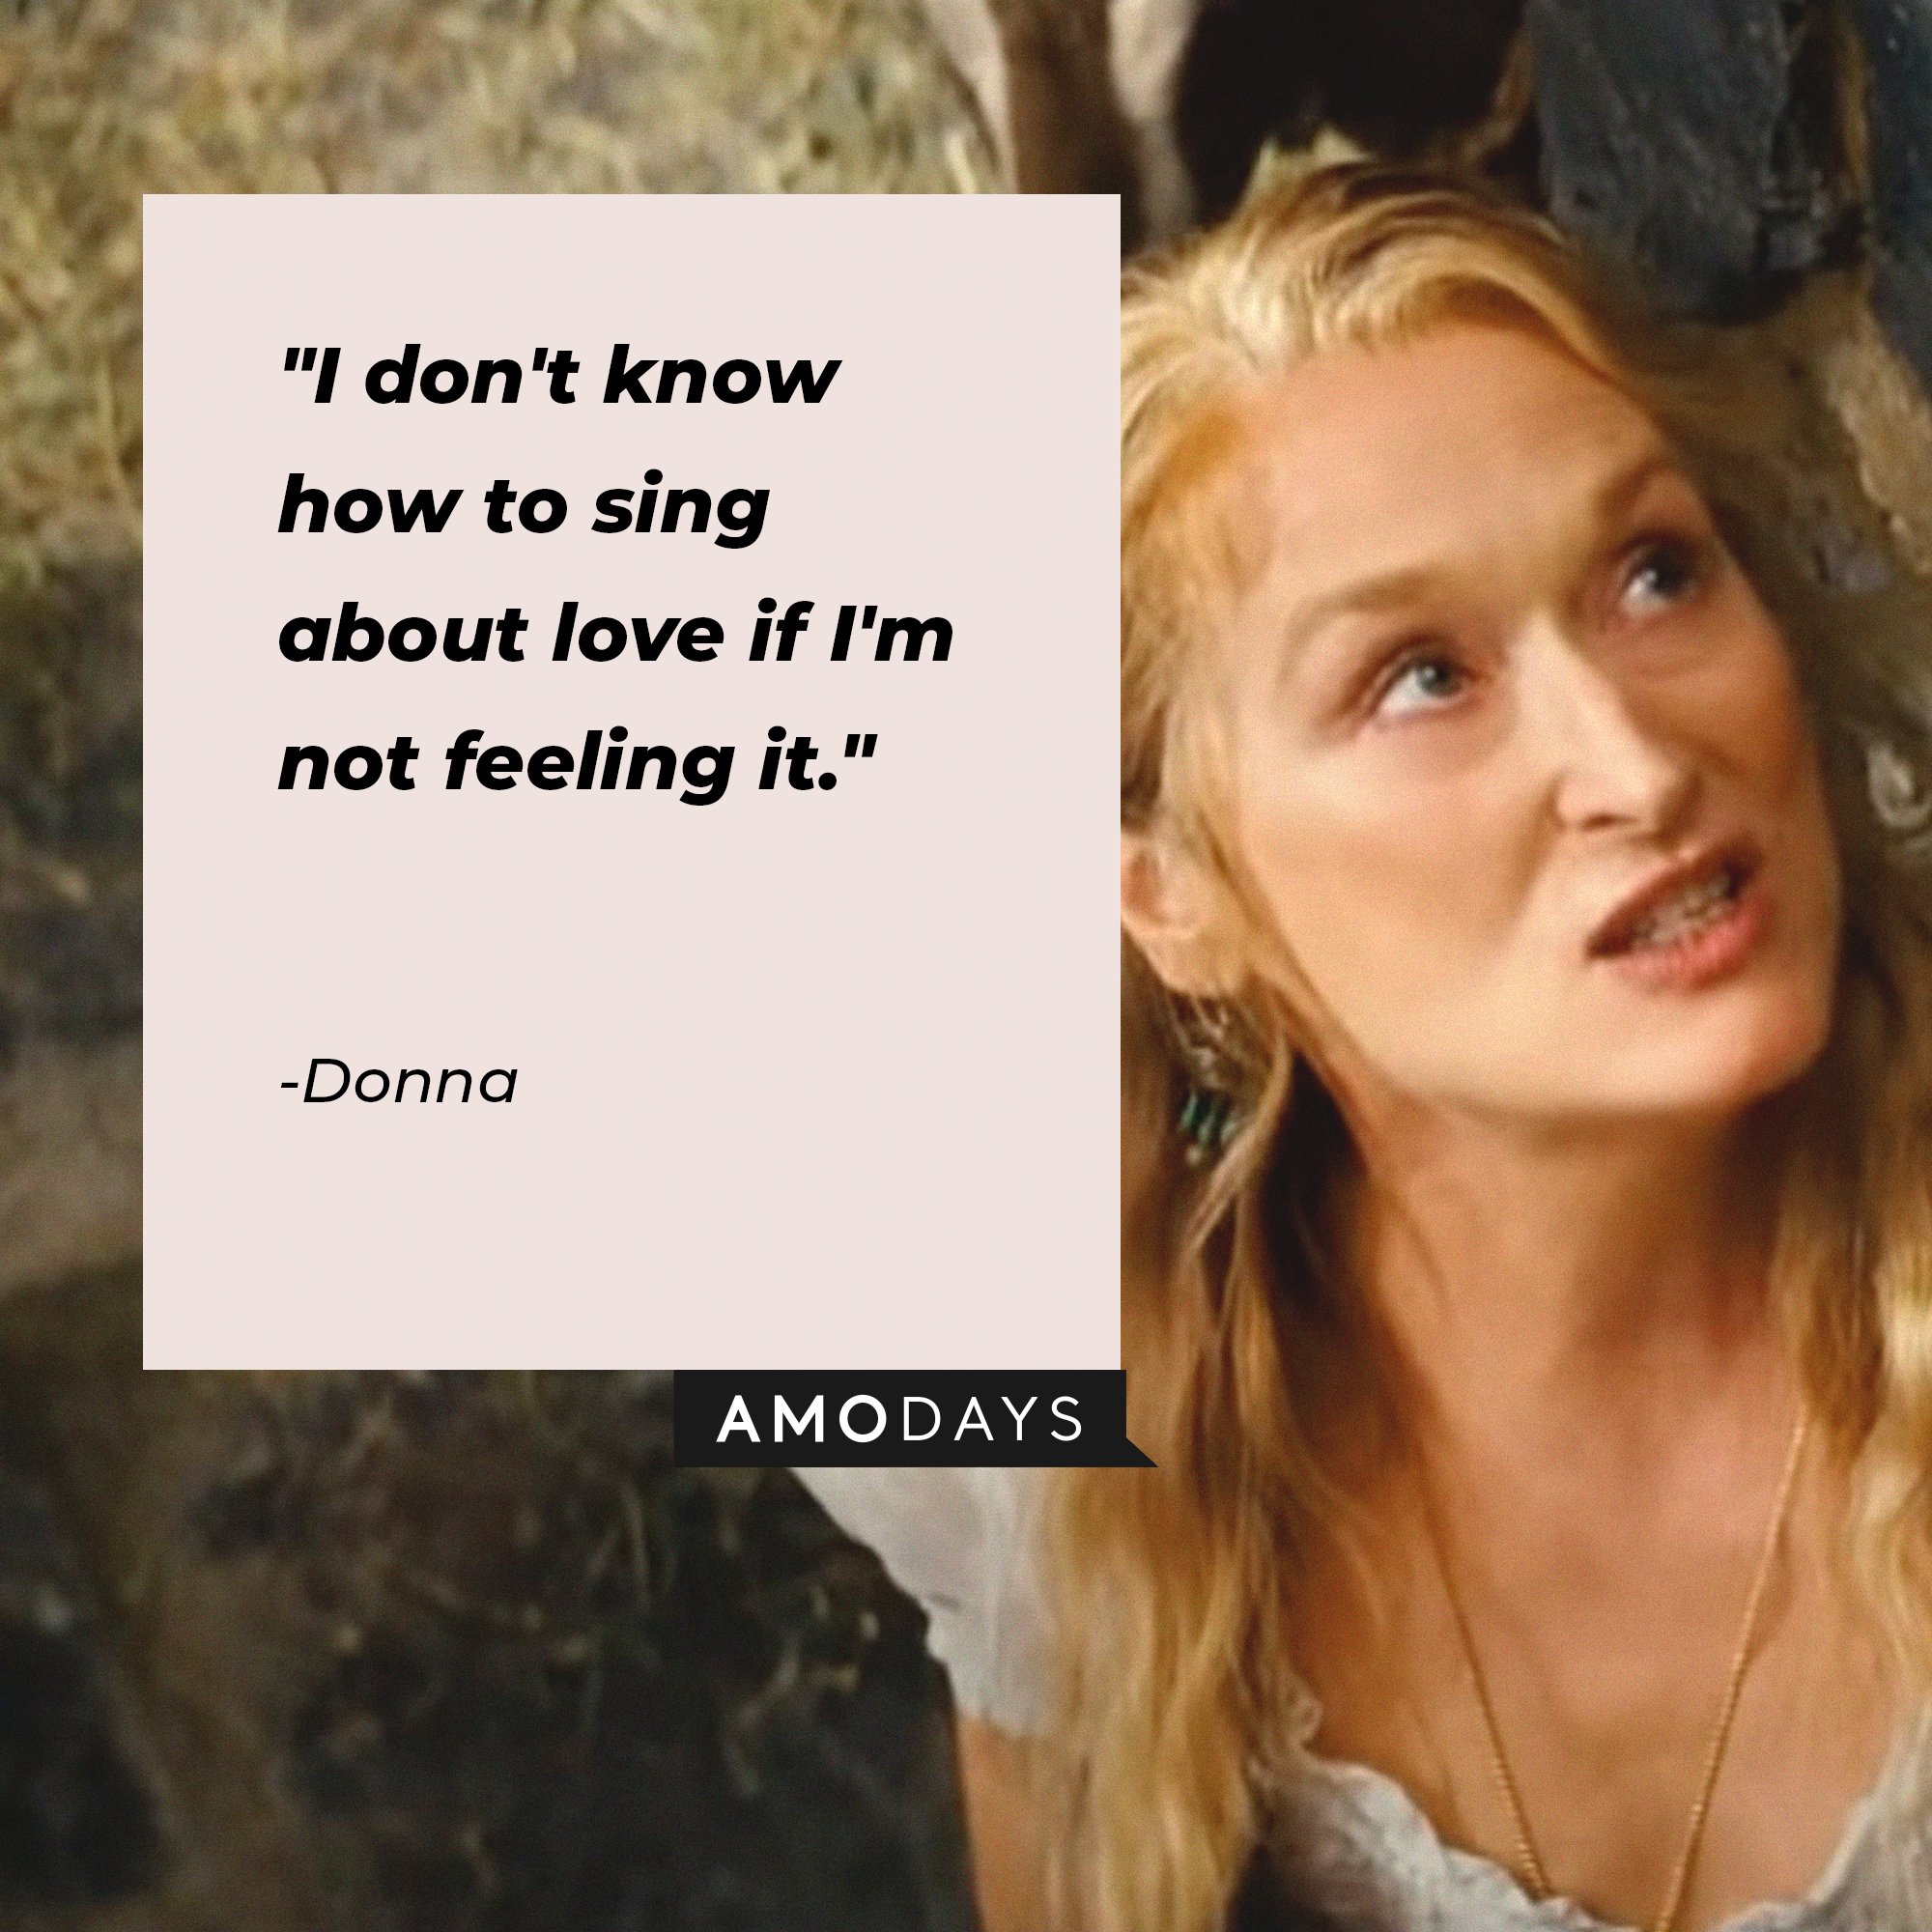 Donna's quote: "I don't know how to sing about love if I'm not feeling it." | Image: AmoDays